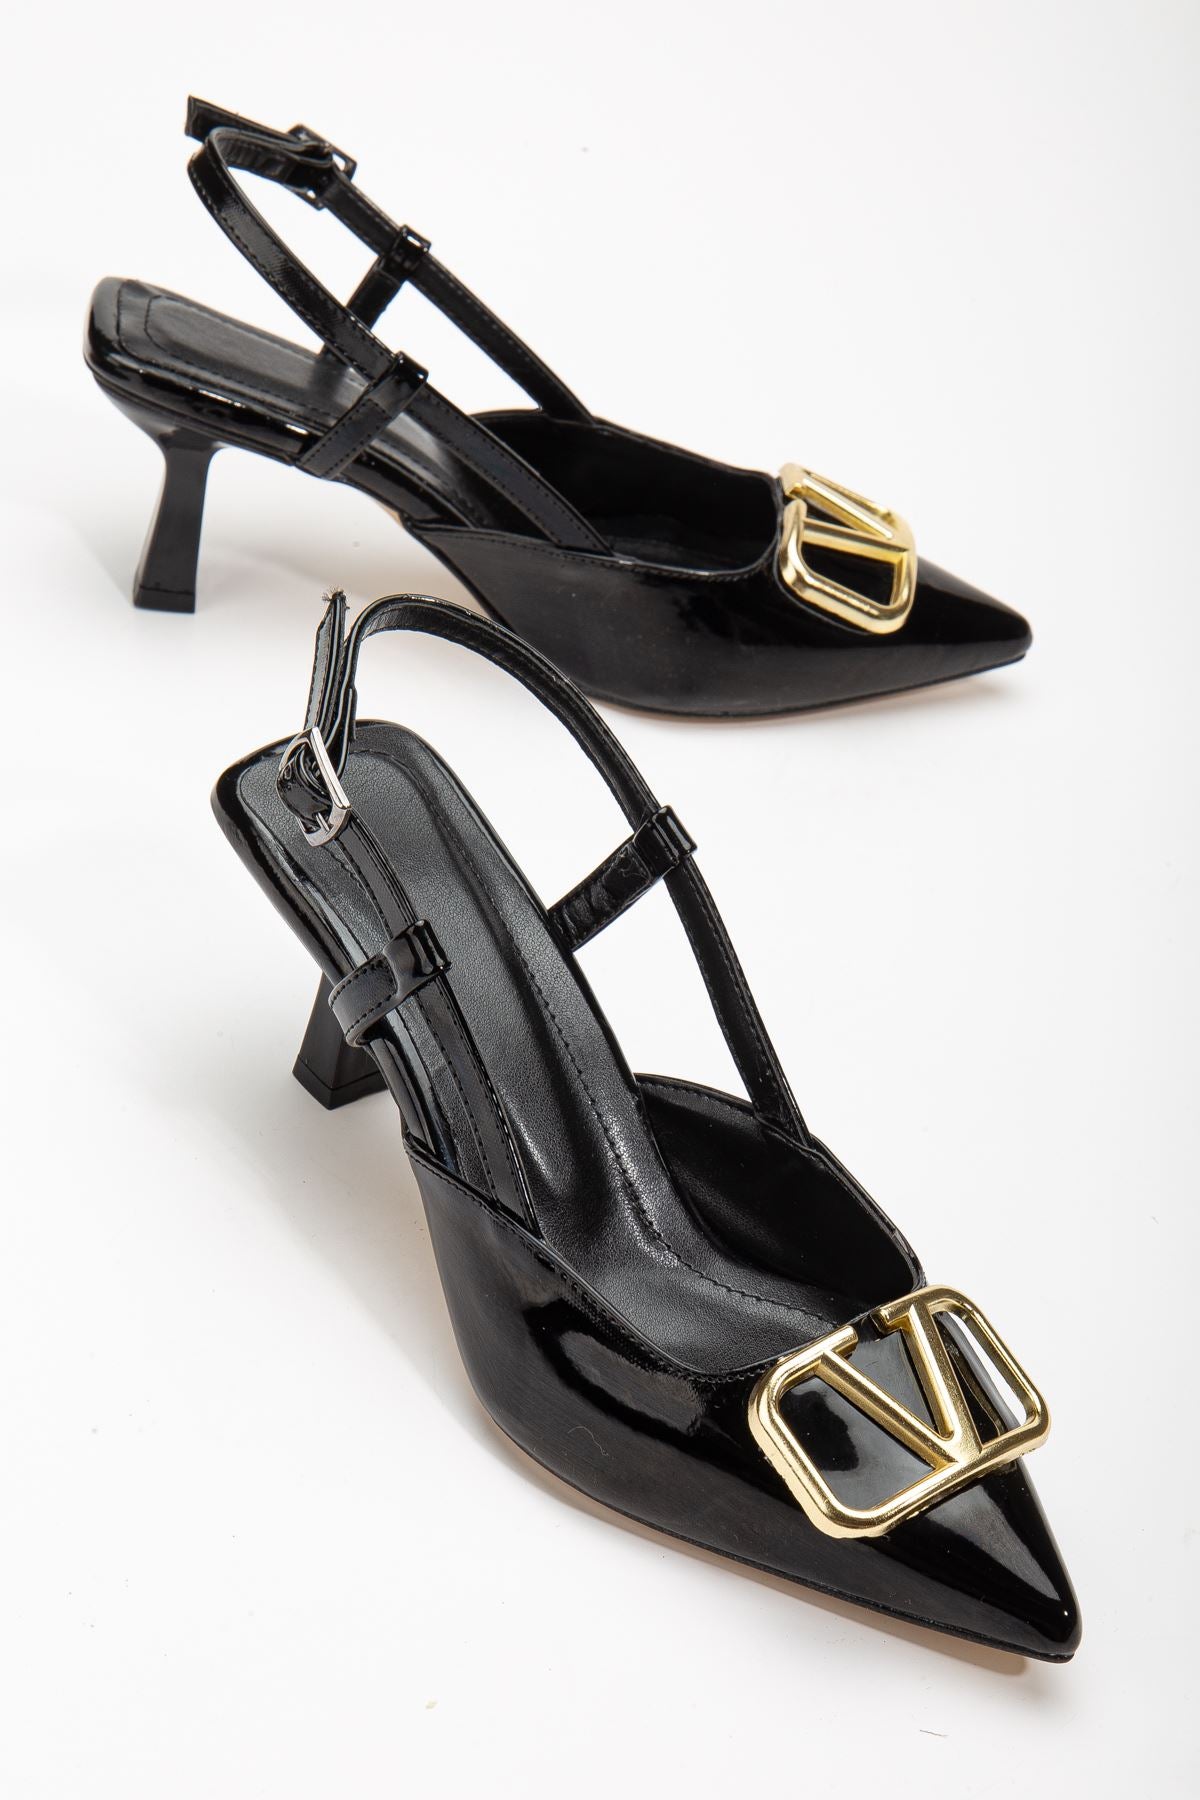 Women's Lianne Black Patent Leather Buckle Detailed Thin Heeled Shoes - STREETMODE ™